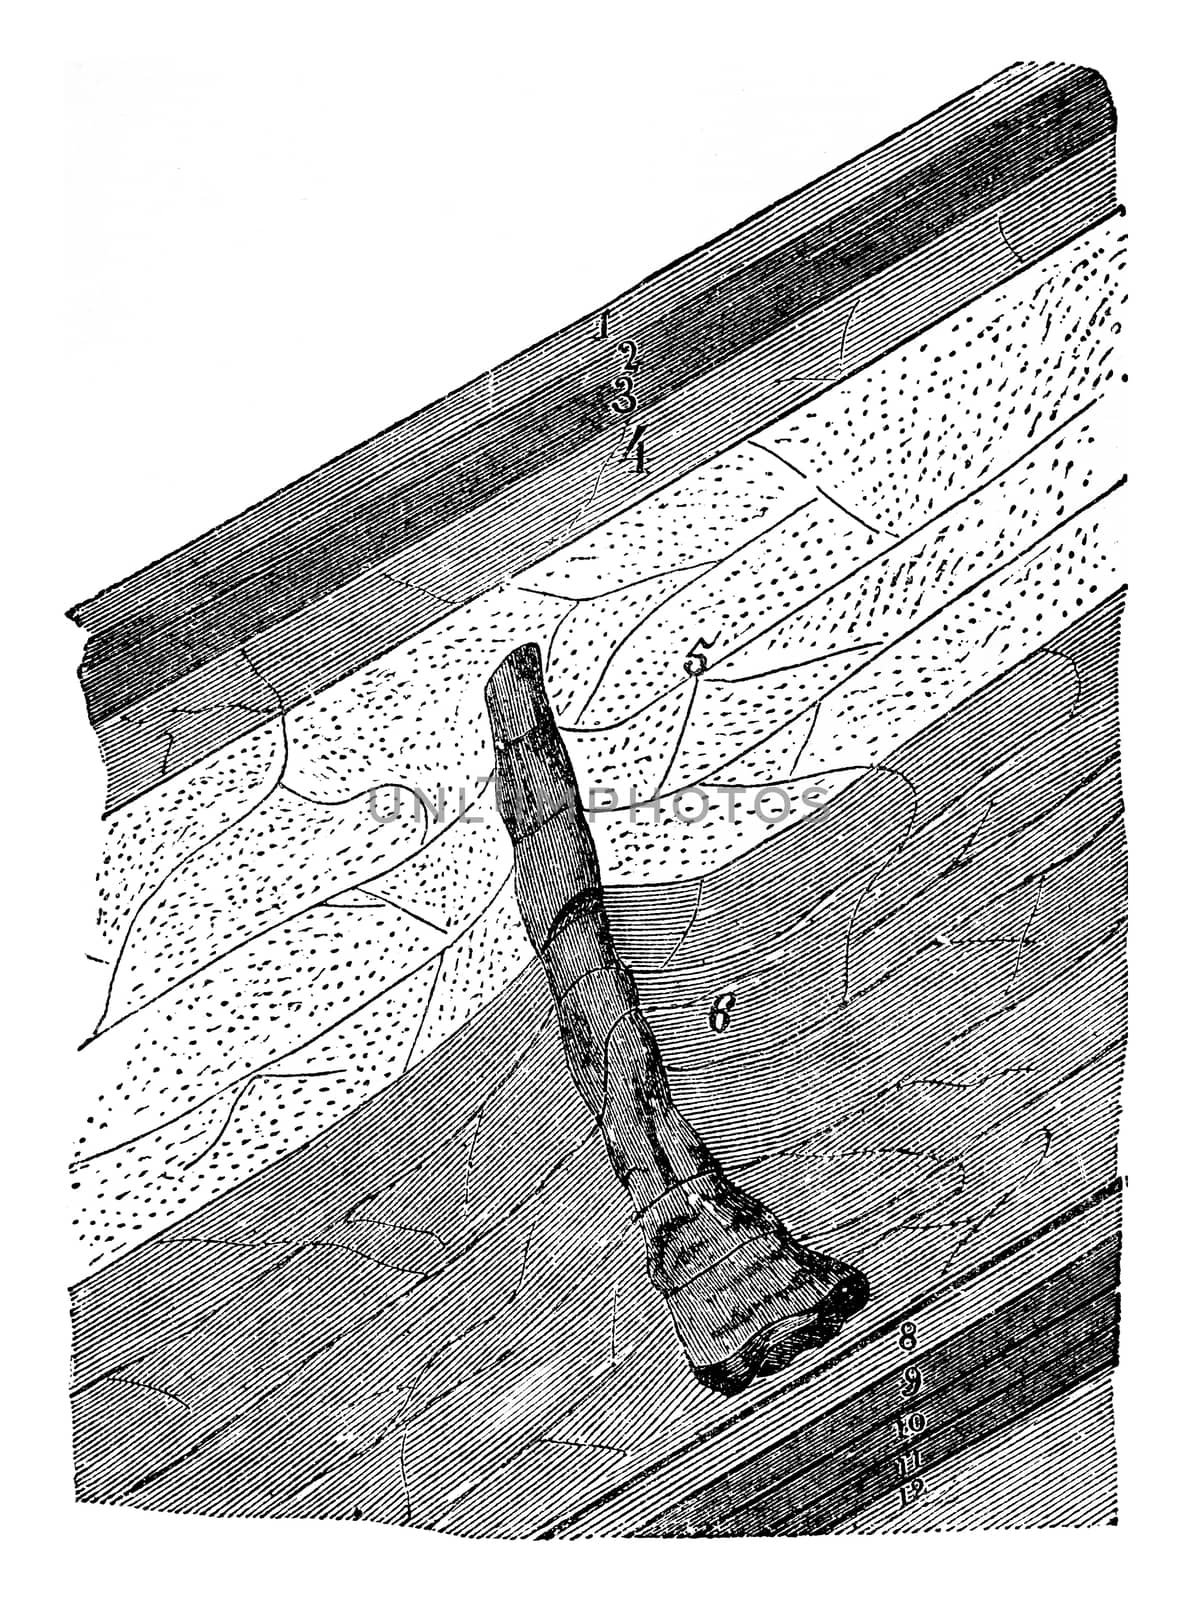 Fossil trees has found 217 meters deep (Anzin mines), vintage engraved illustration. History of France – 1885.
